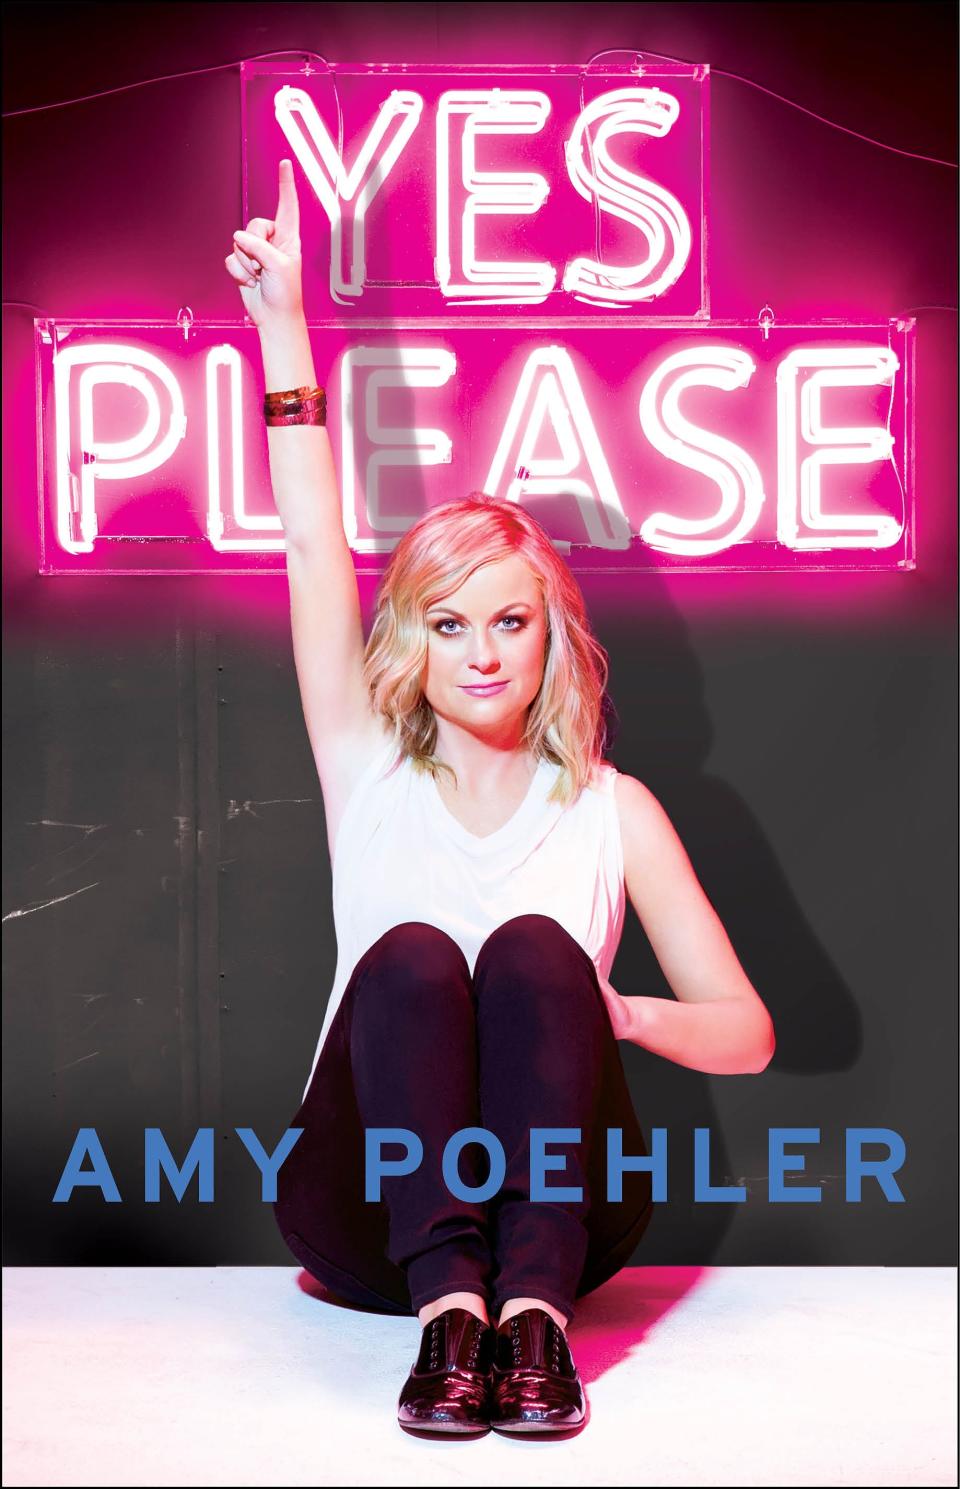 "Yes Please" by Amy Poehler